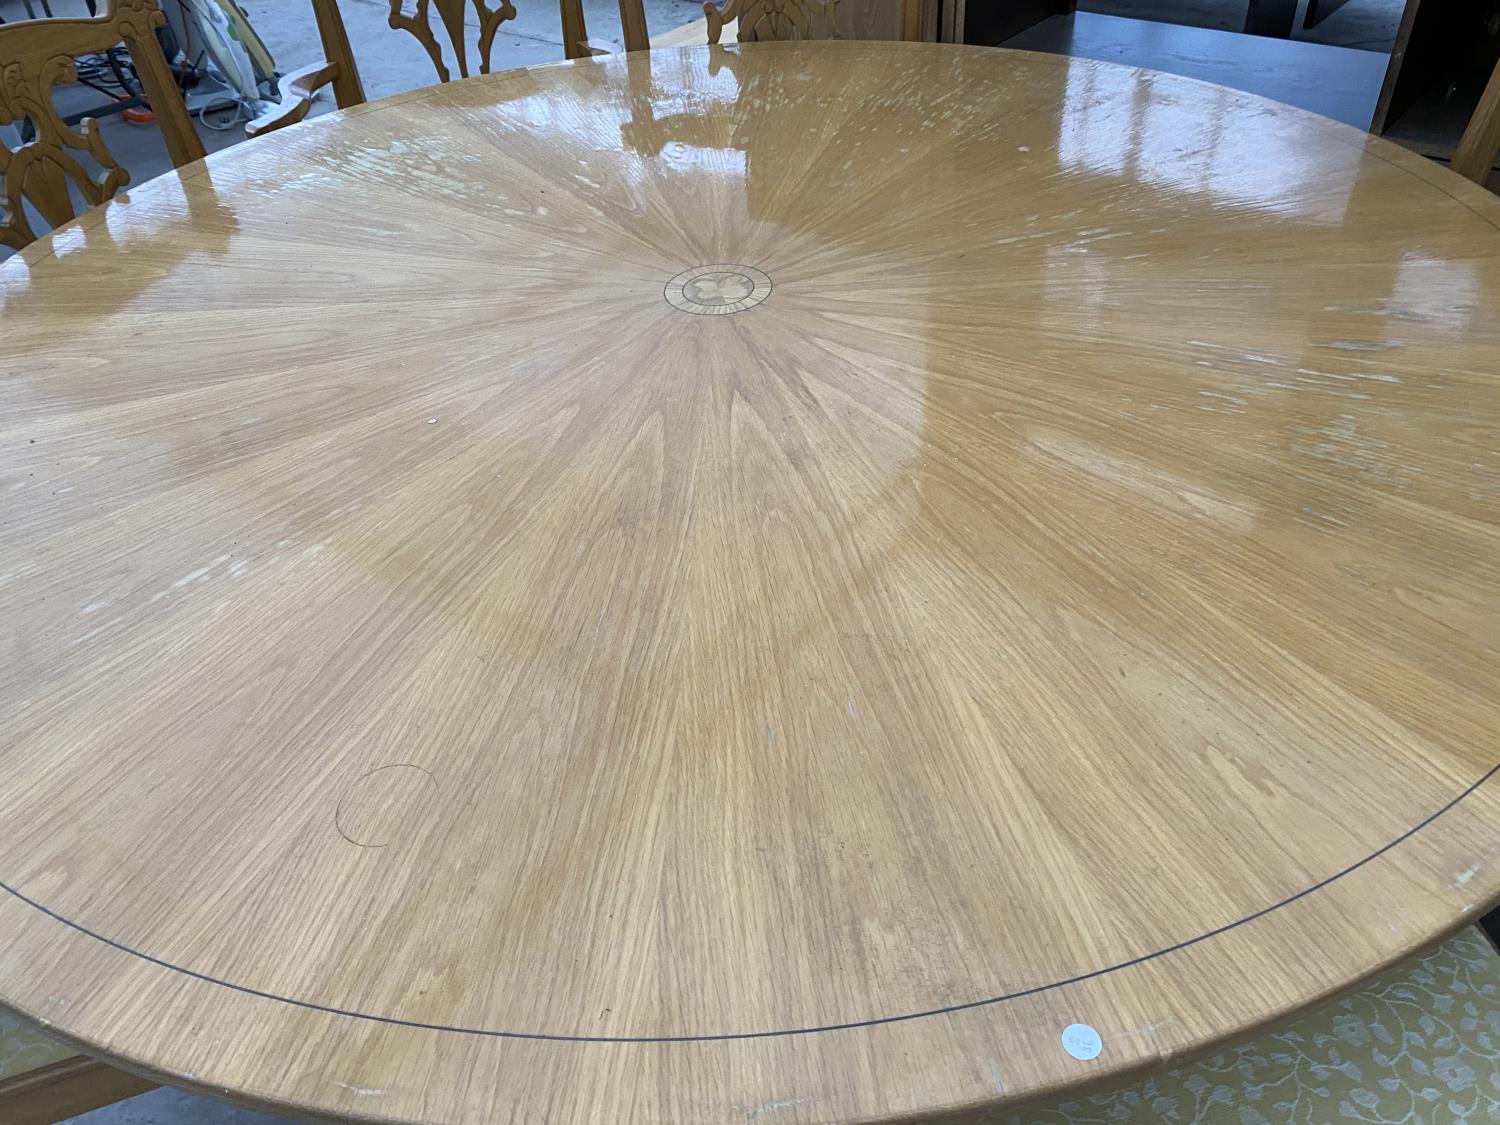 A LARGE HEAVY CIRCULAR OAK DINING TABLE - Image 3 of 9